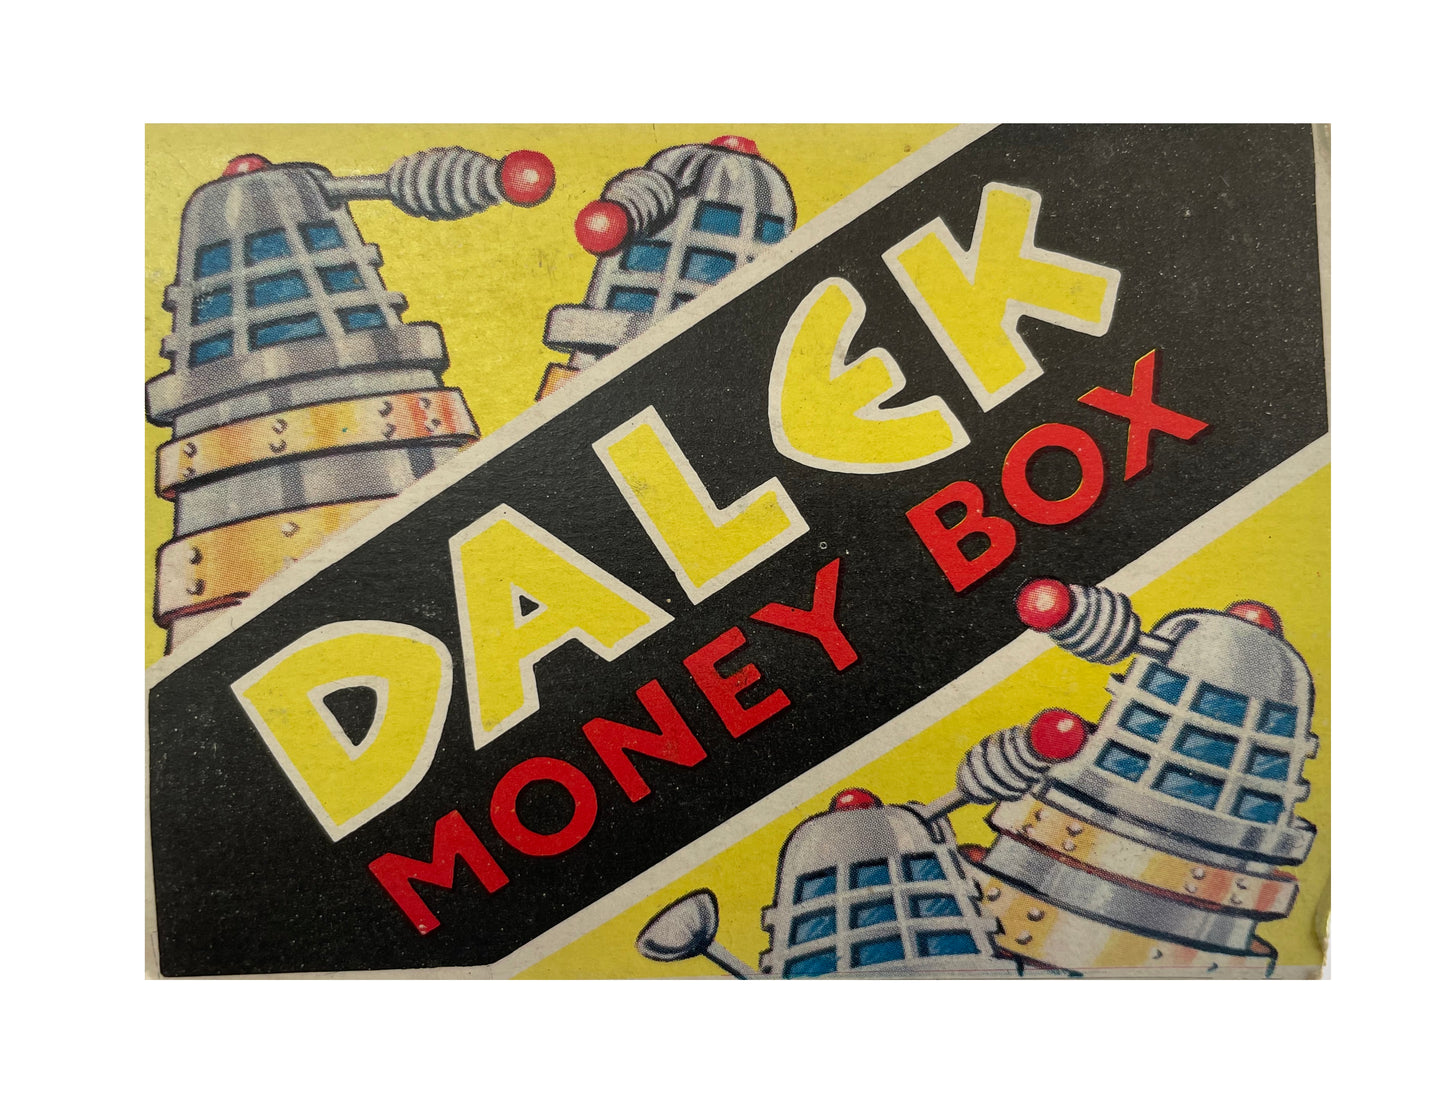 Vintage 1965 Dr Who Cowan de Groot Ltd Dalek Money Box - Empire Made Doctor From The TV Series - Mint In The Original Box - Ultra Rare Shop Find